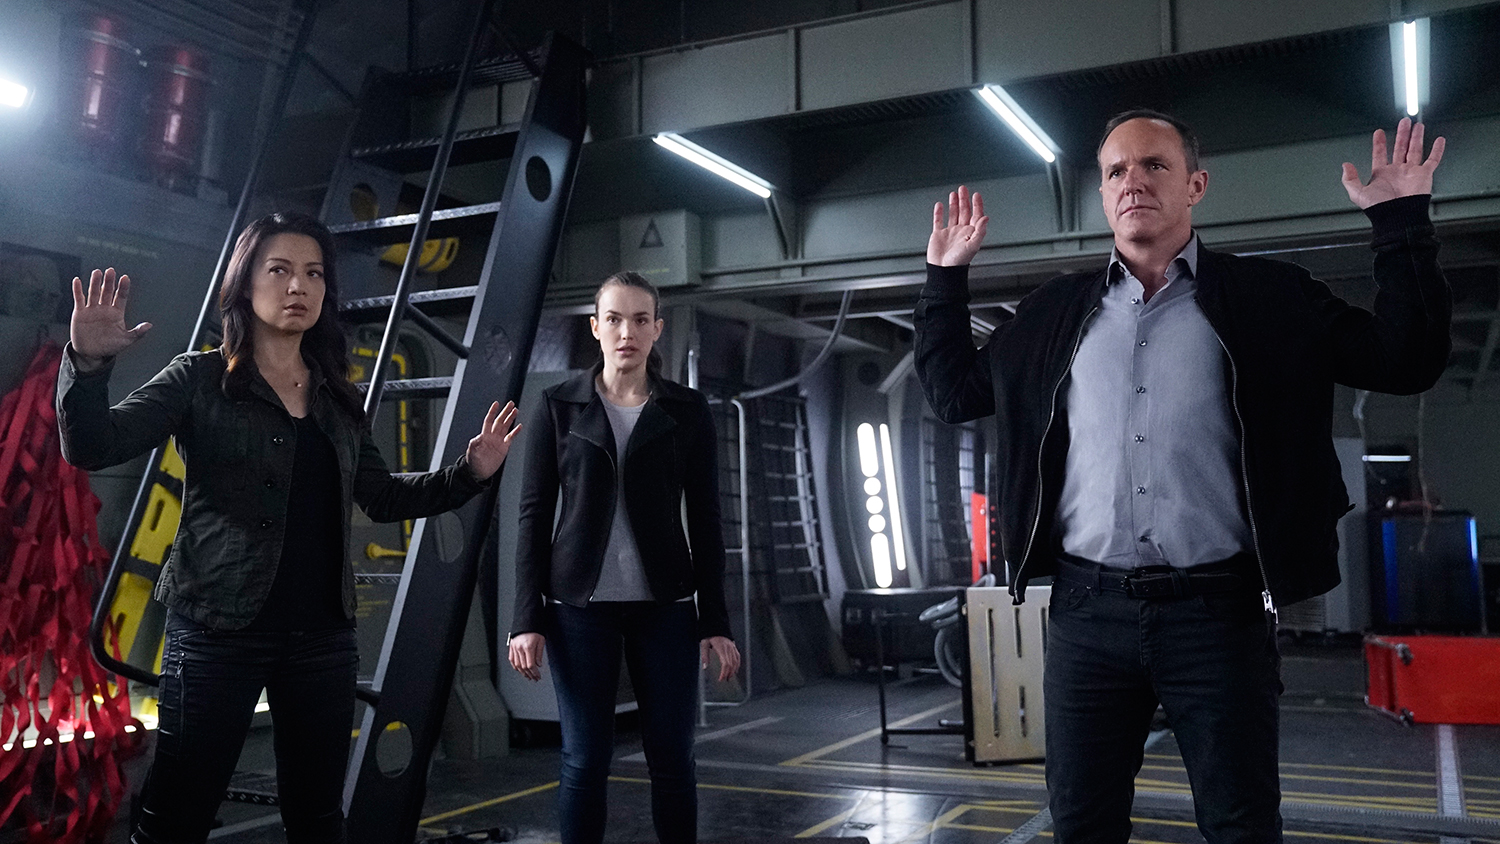 People raise their hands in Marvel's Agents of S.H.I.E.L.D.